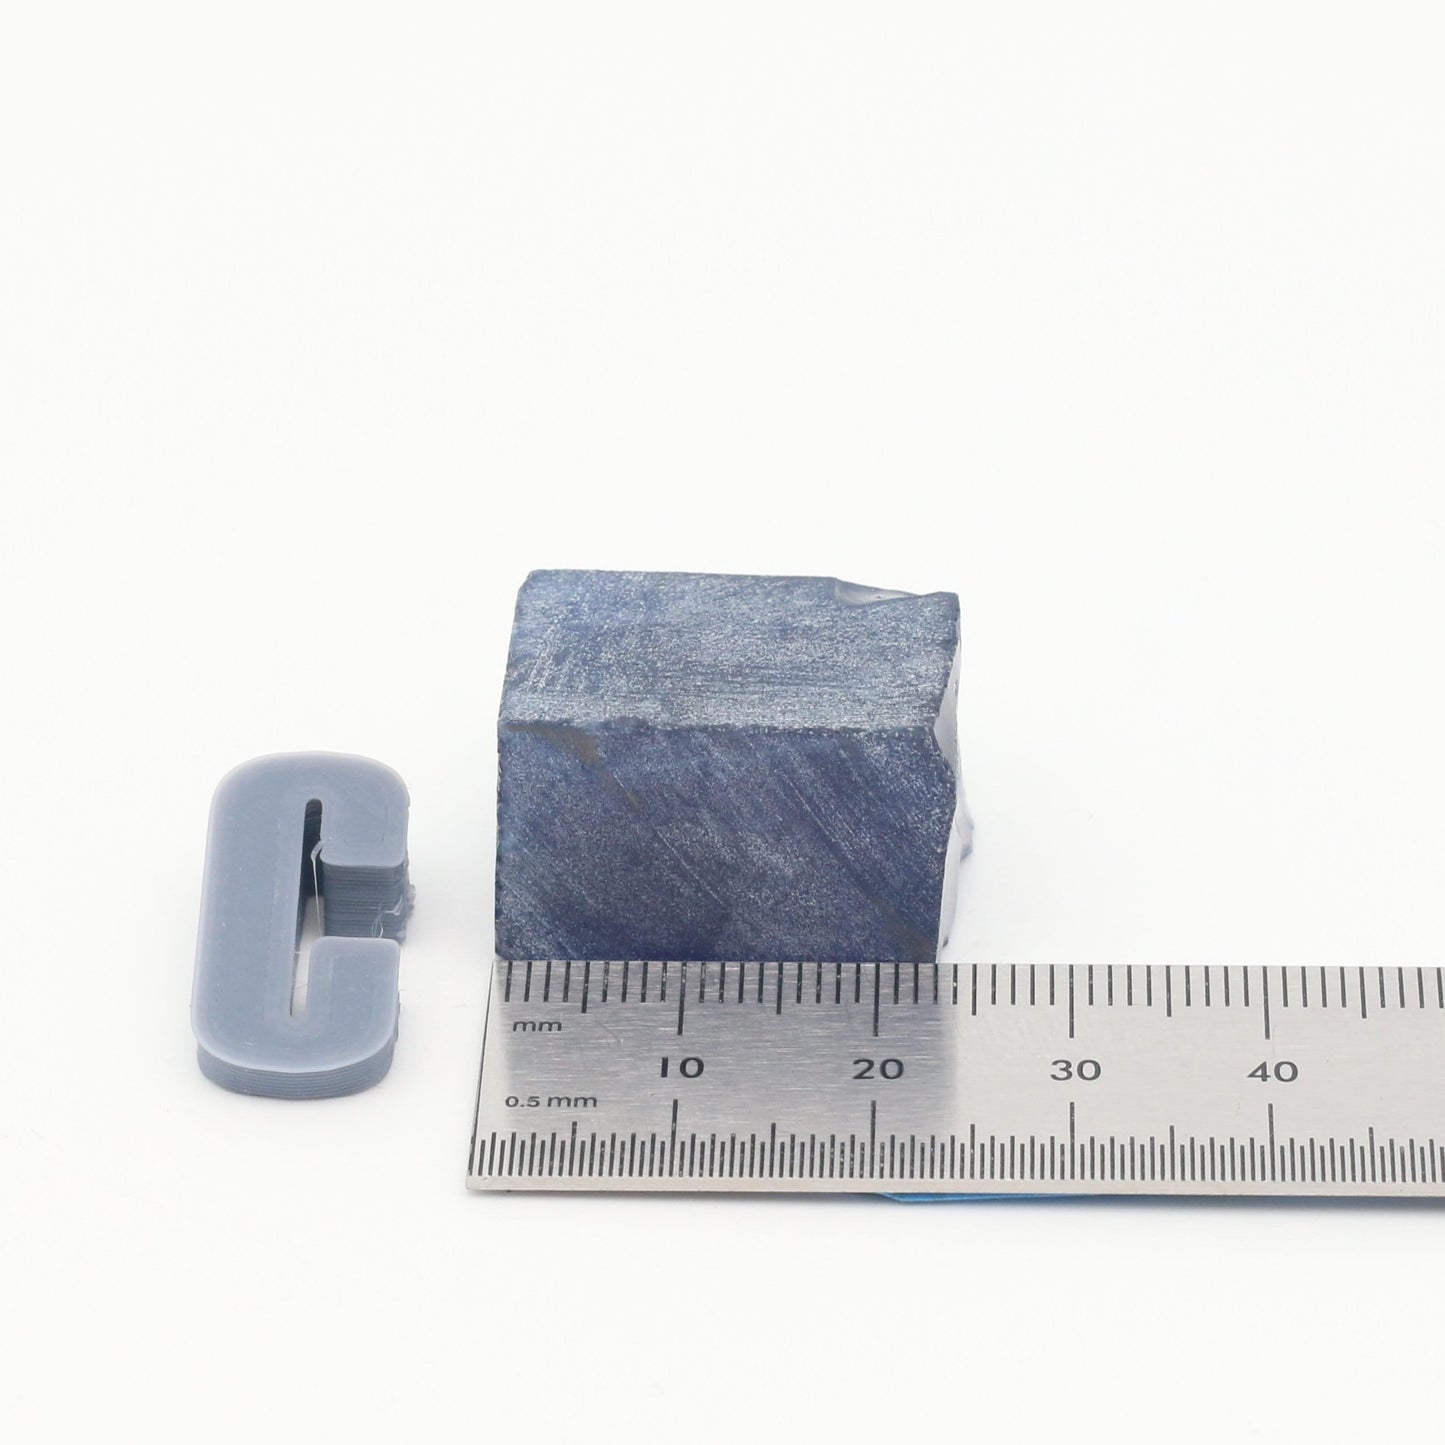 Medium Blue Sapphire (Included) Nanosital Synthetic Lab Created Faceting Rough for Gem Cutting - #Z-597 - Various Sizes